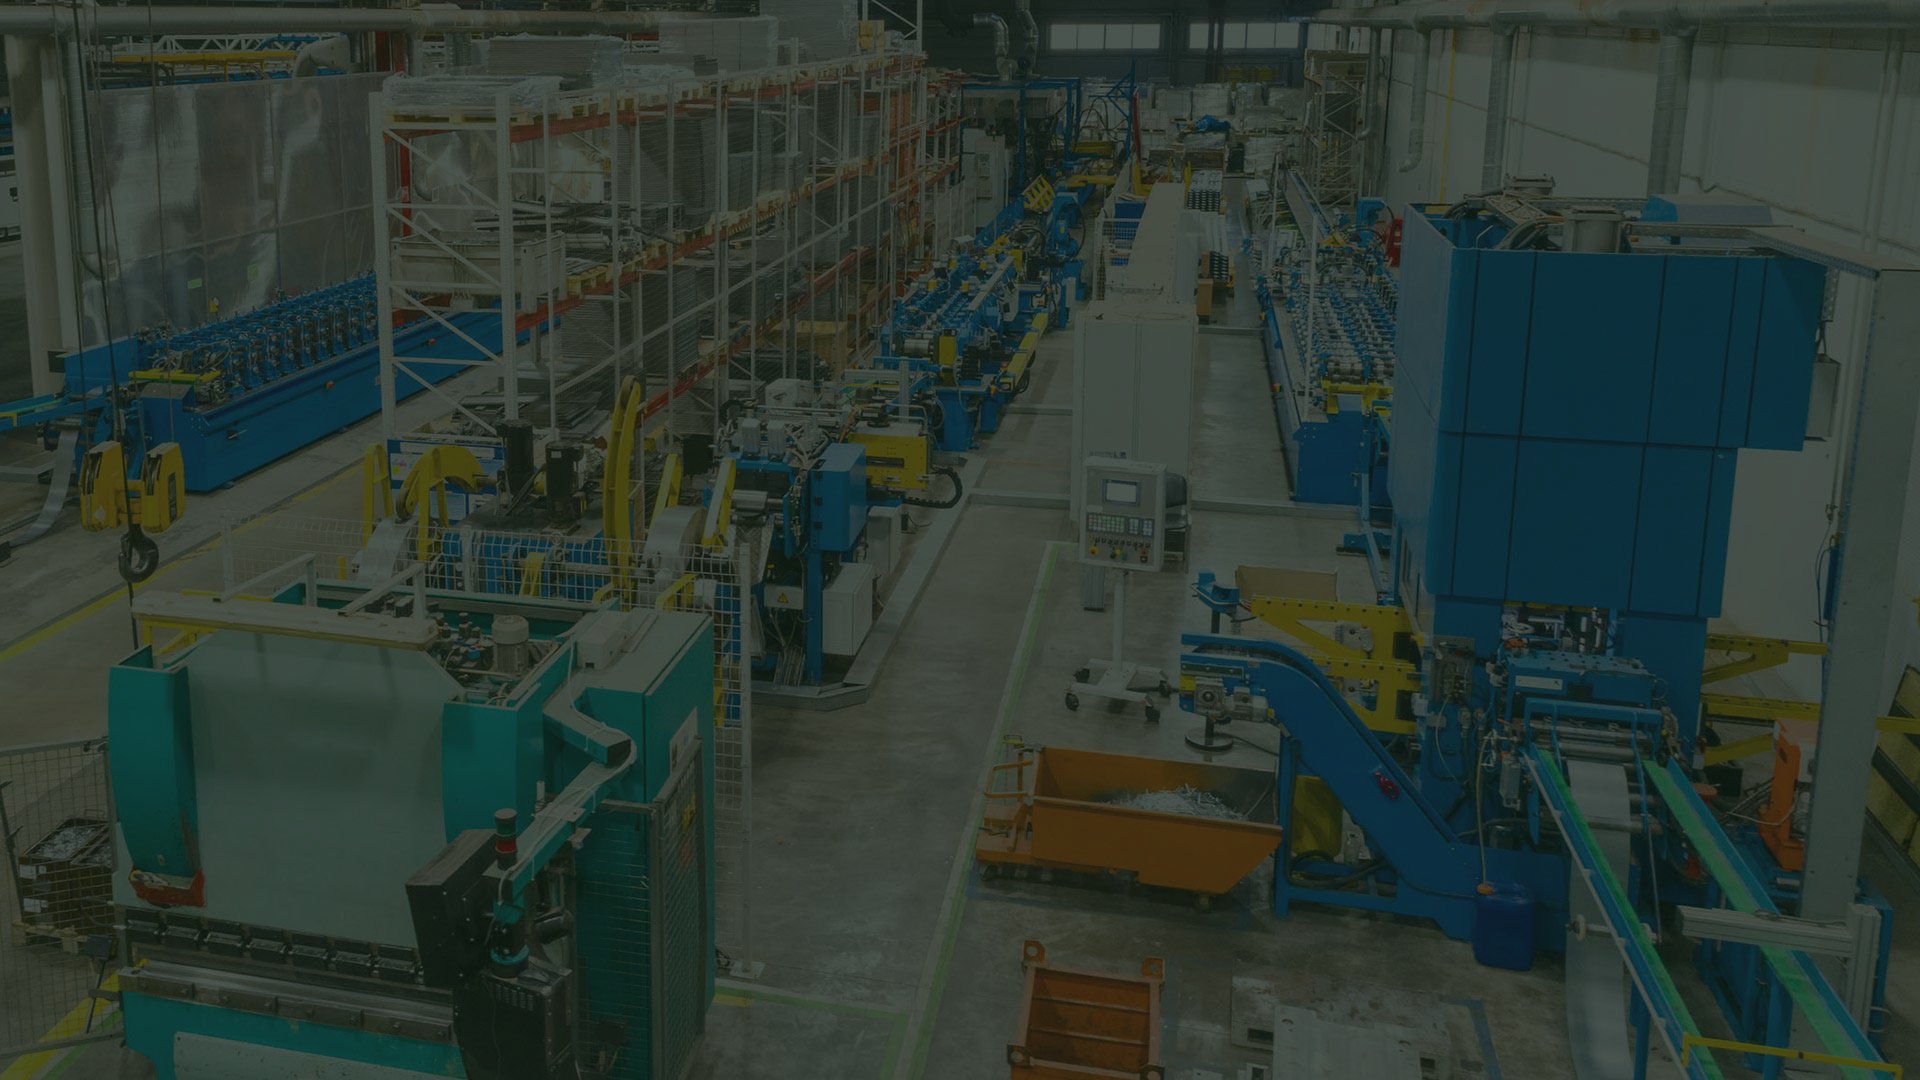 A manufacturing floor with various machinery